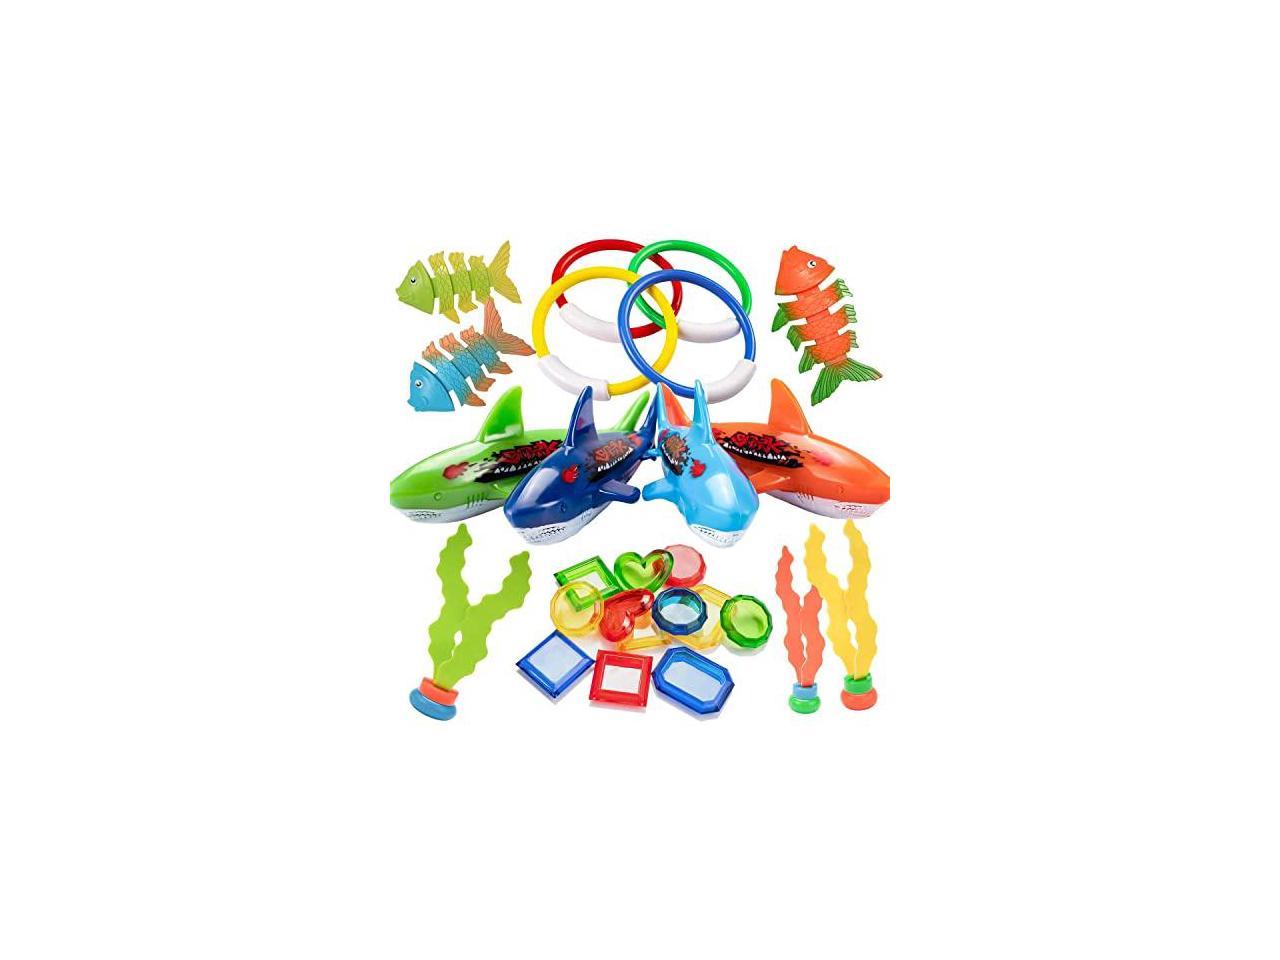 UNEEDE Diving Toy Swimming Pool Toy Underwater Fun Dive Training Toy 19 Pcs with 4 Dive Ring,4 Toypedo Bandit,3 Stringy Octopu,8 Jewel Gem Treasure Weighted Dive Toy Bulk Gift for Kid Child Boy Girl 